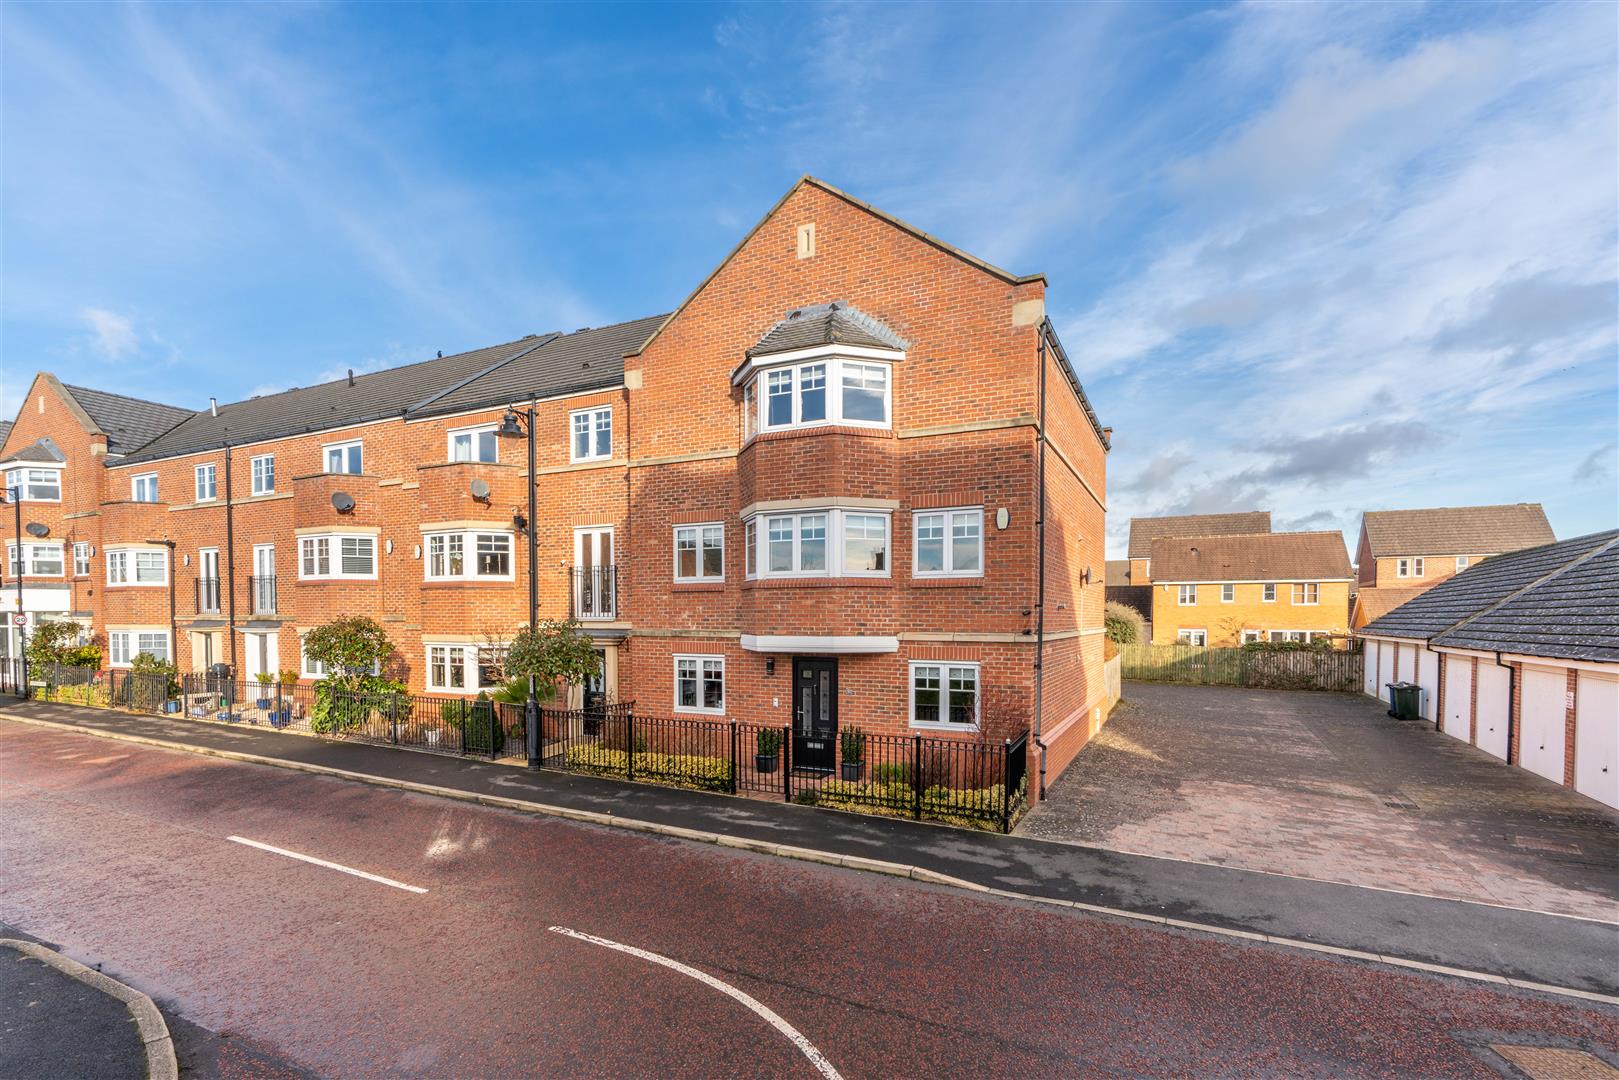 4 bed town house for sale in Featherstone Grove, Great Park, NE3 